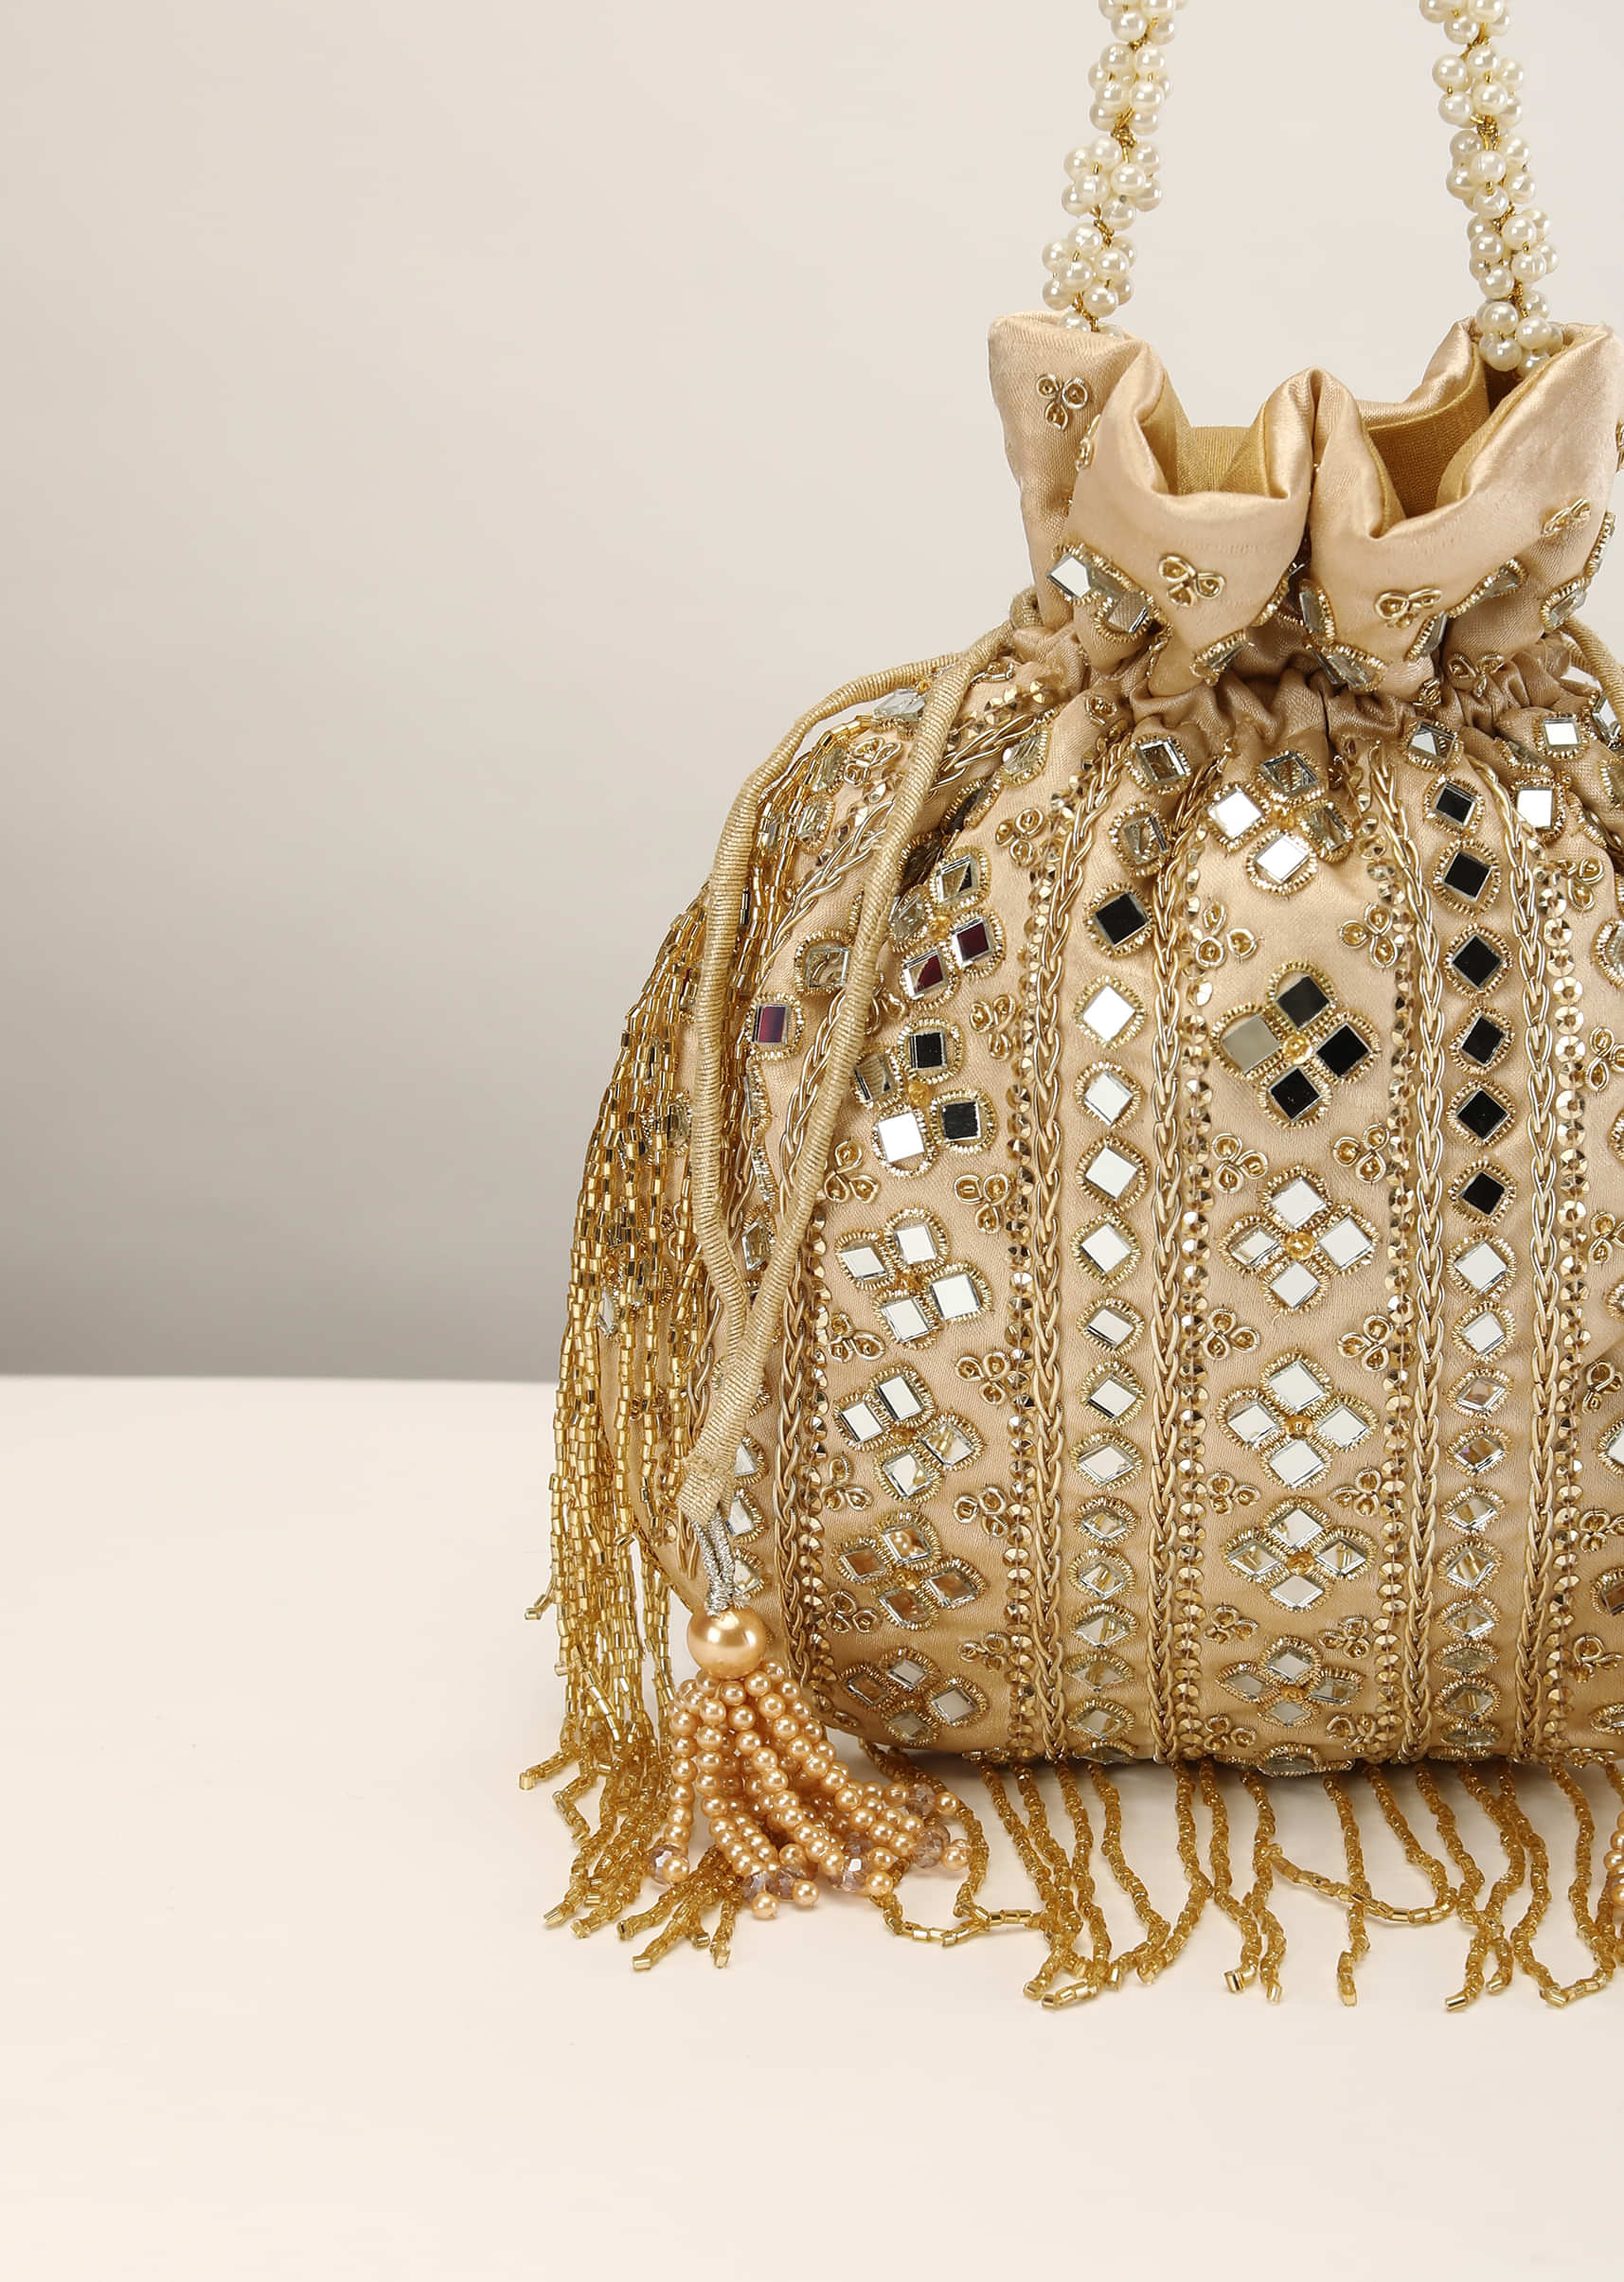 Beaded clutch handbags are most glamorous and trendy - Rani boutique